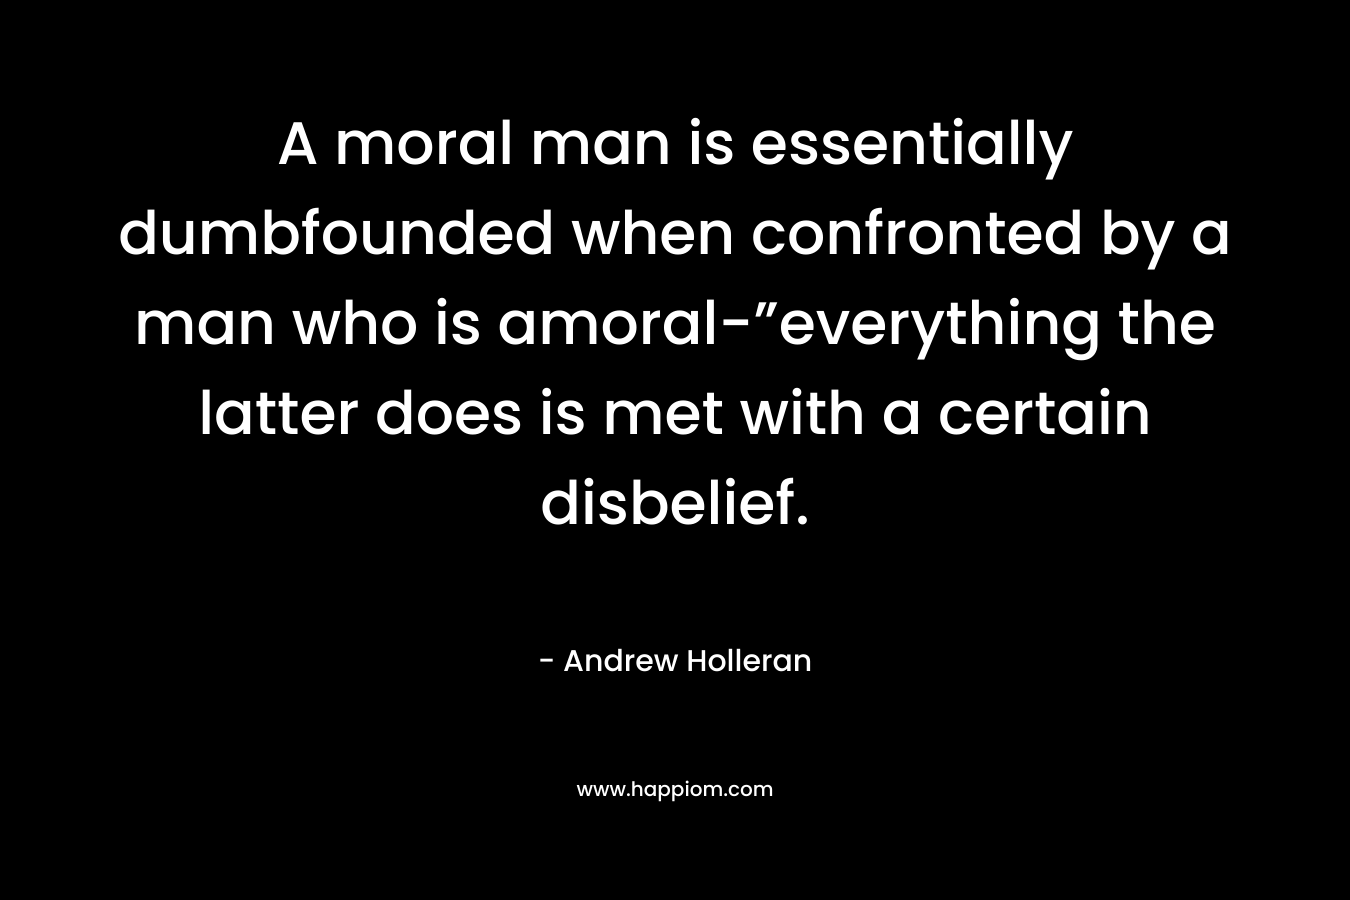 A moral man is essentially dumbfounded when confronted by a man who is amoral-”everything the latter does is met with a certain disbelief. – Andrew Holleran